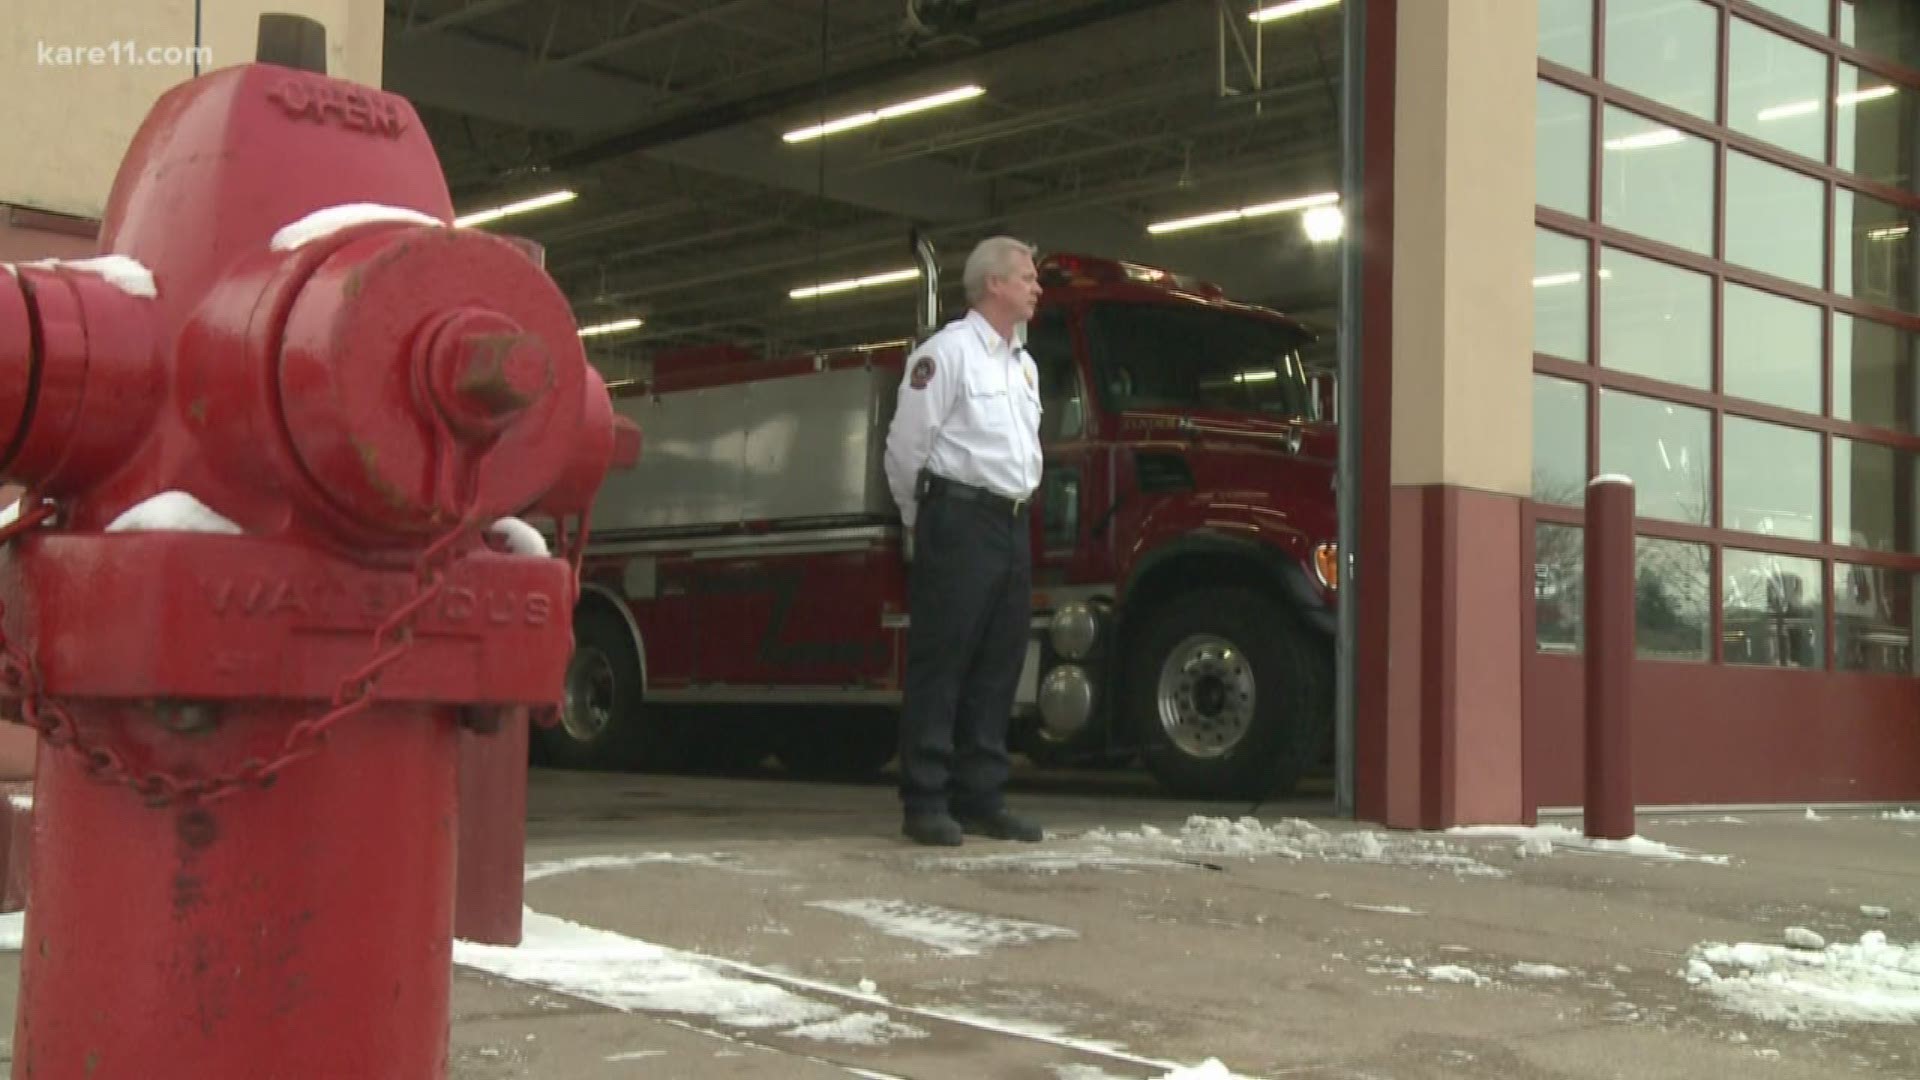 Hastings has come to rely on, and reward, a growing number of "Hydrant Heroes", who made a habit of clearing hydrants of snow after every big storm last year.